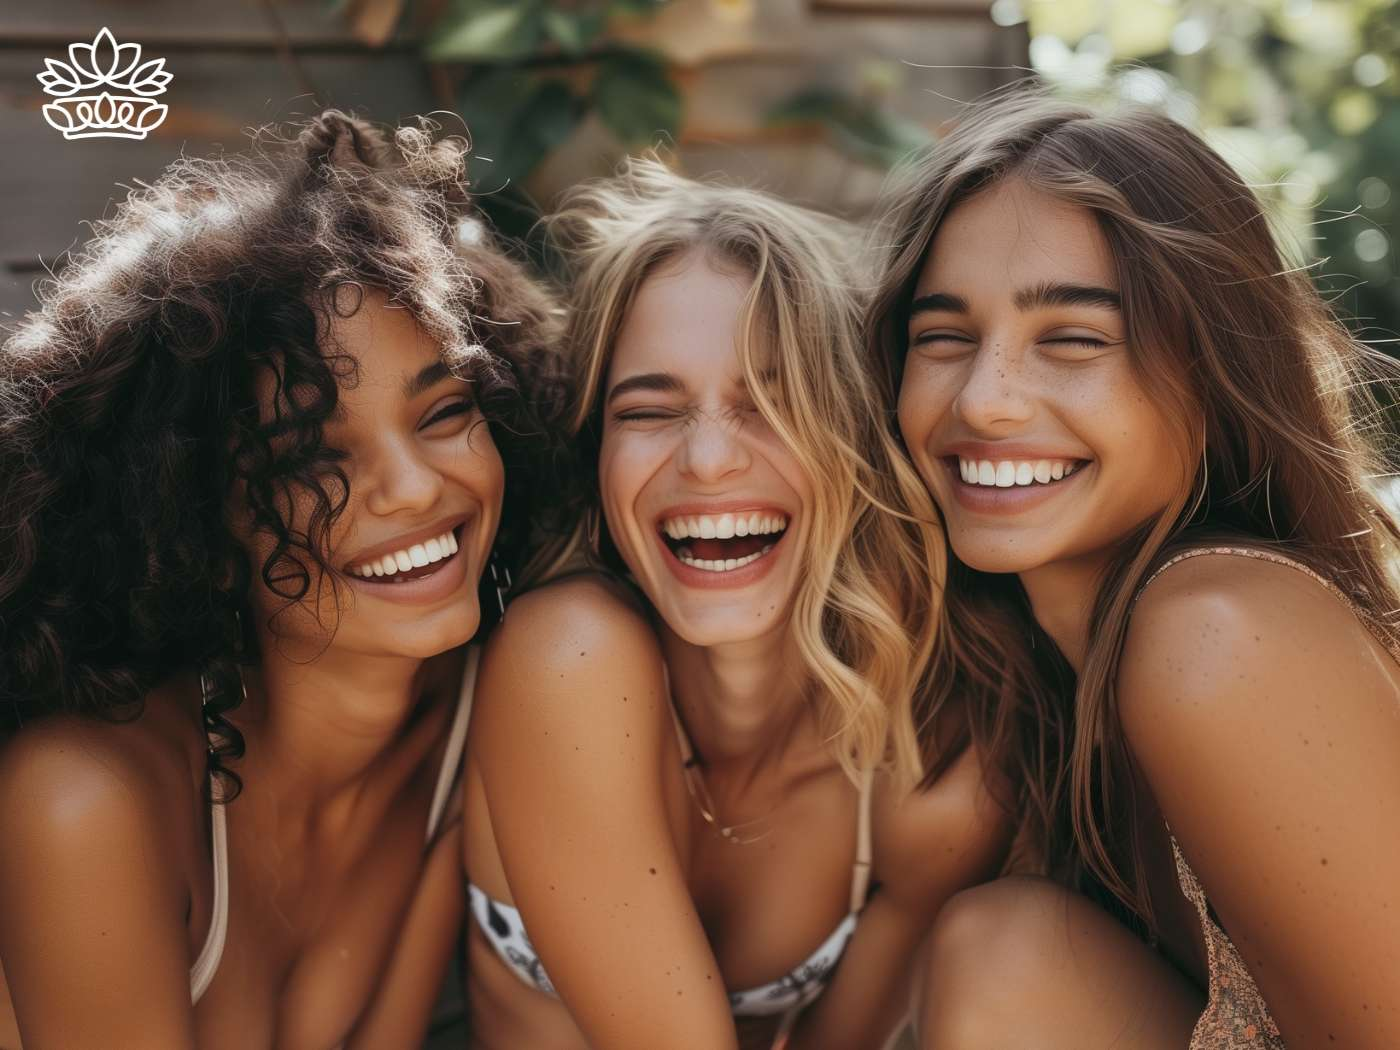 Three radiant women with sun-kissed smiles enjoying each other's company, exuding the joy of heartfelt friendship, perfect for celebrating life's special moments with Fabulous Flowers and Gifts.